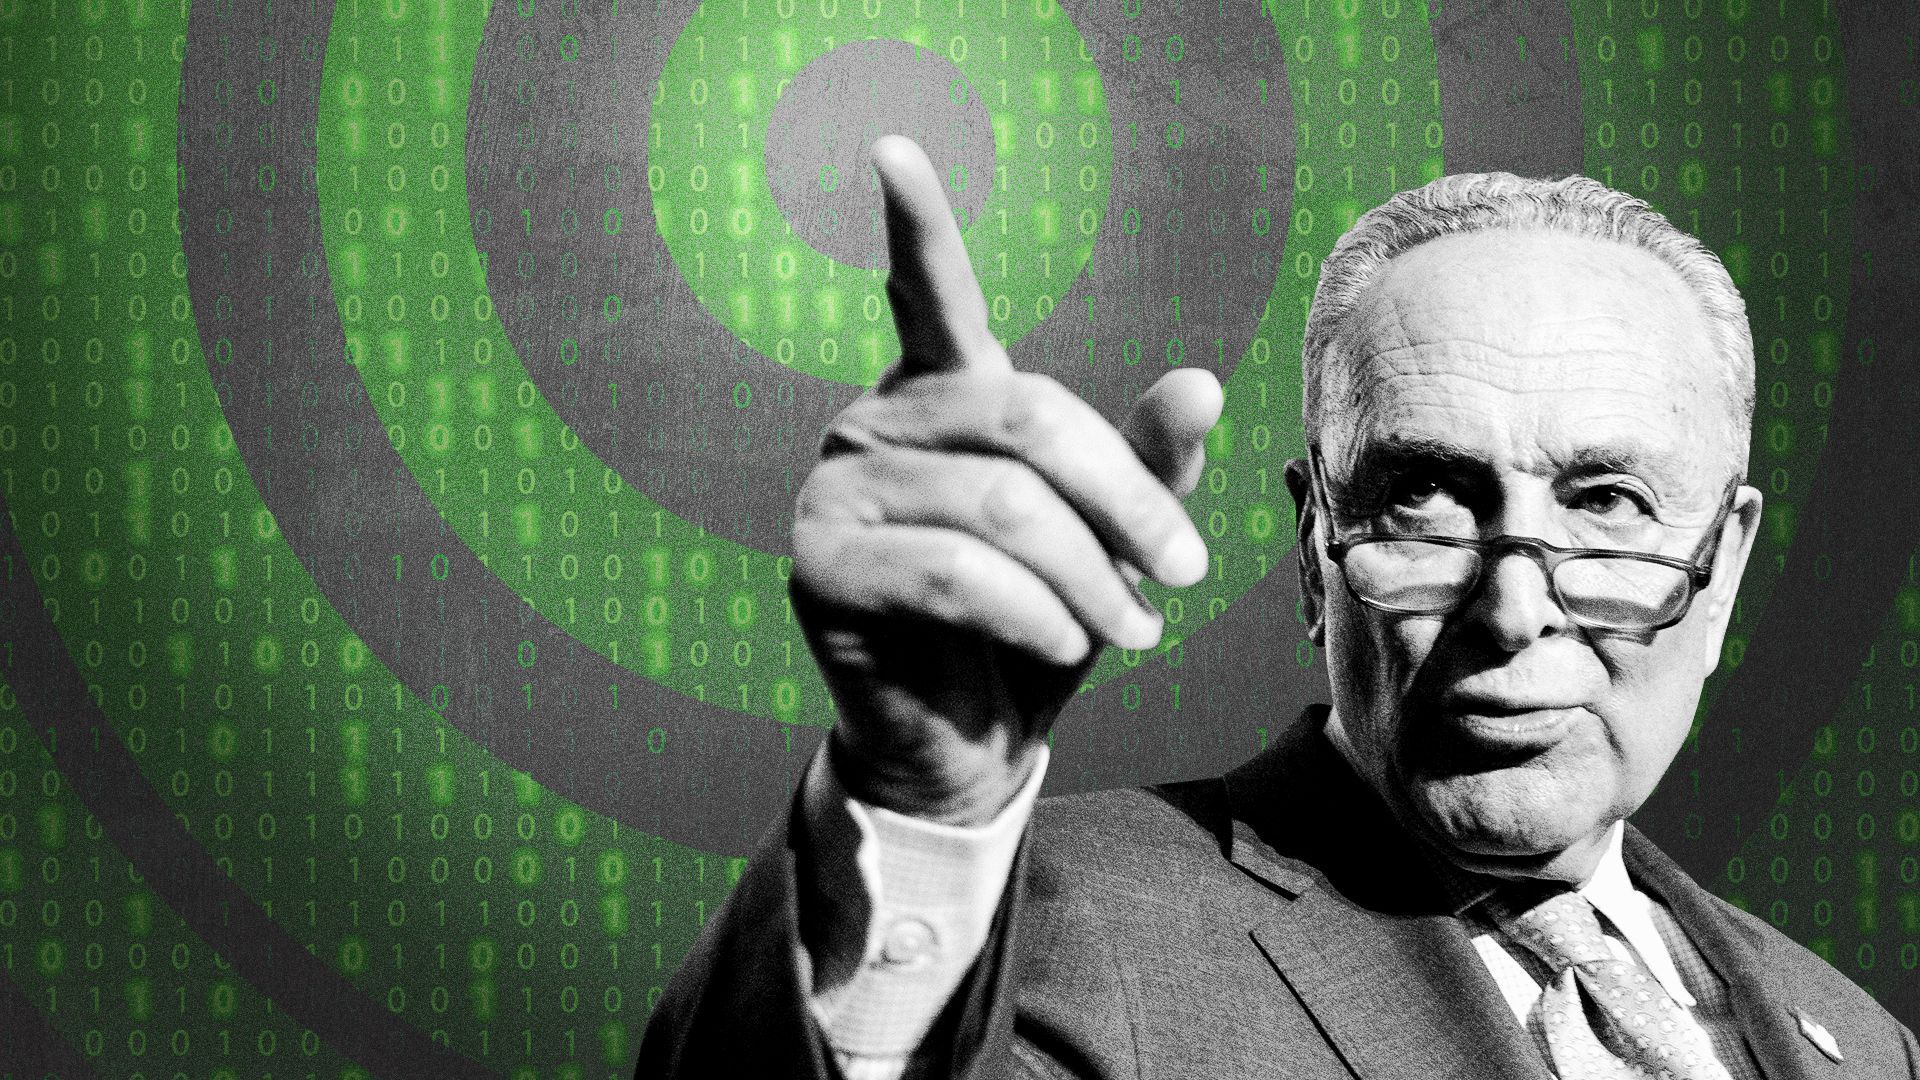 Scoop: Schumer lays groundwork for Congress to regulate AI